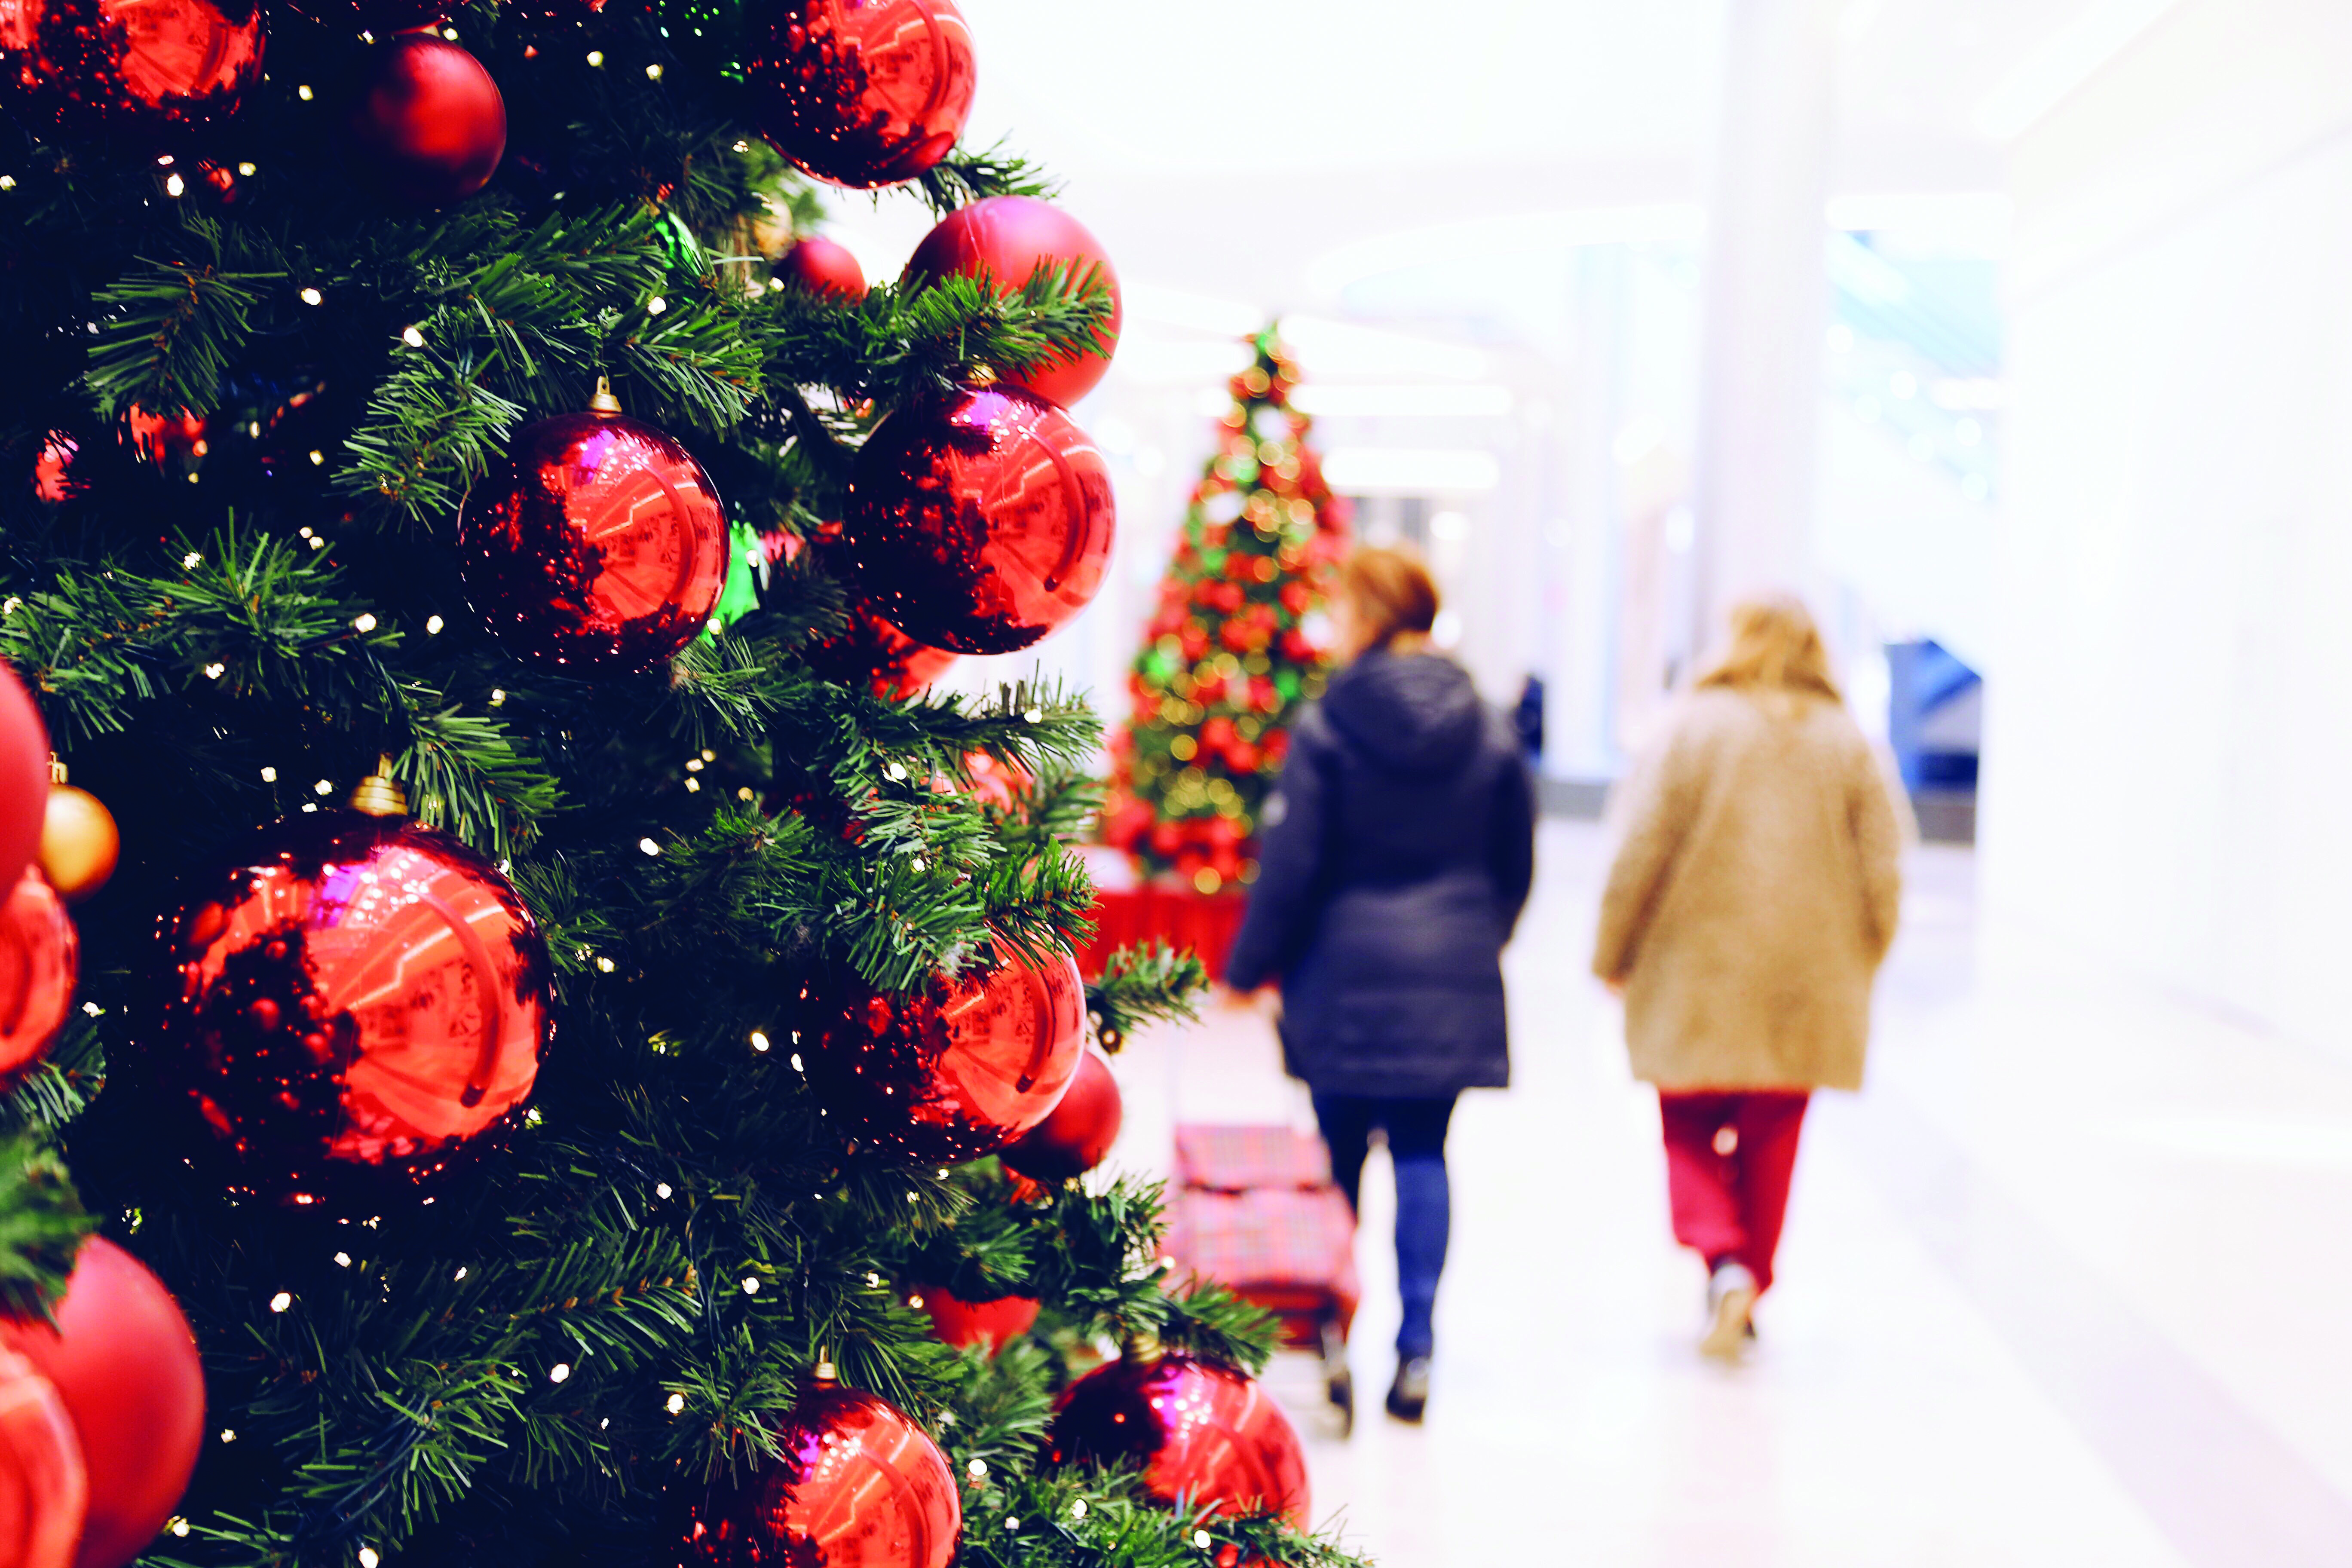 Staying Safe… When Shopping This Holiday Season